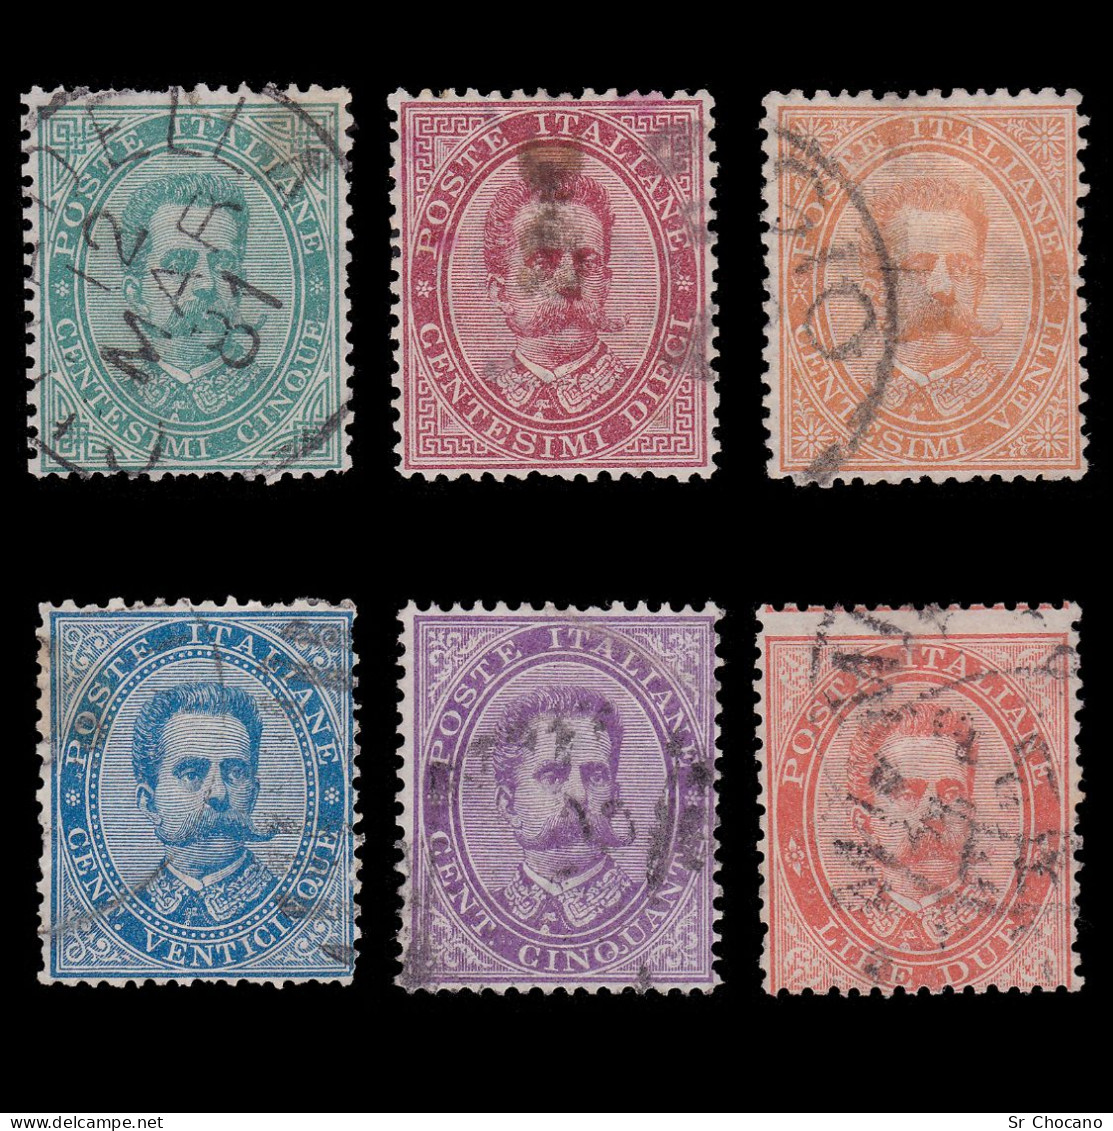 ITALY.1879-82.K.HUMBERT I.SET 6 STAMPS.USED. - Used